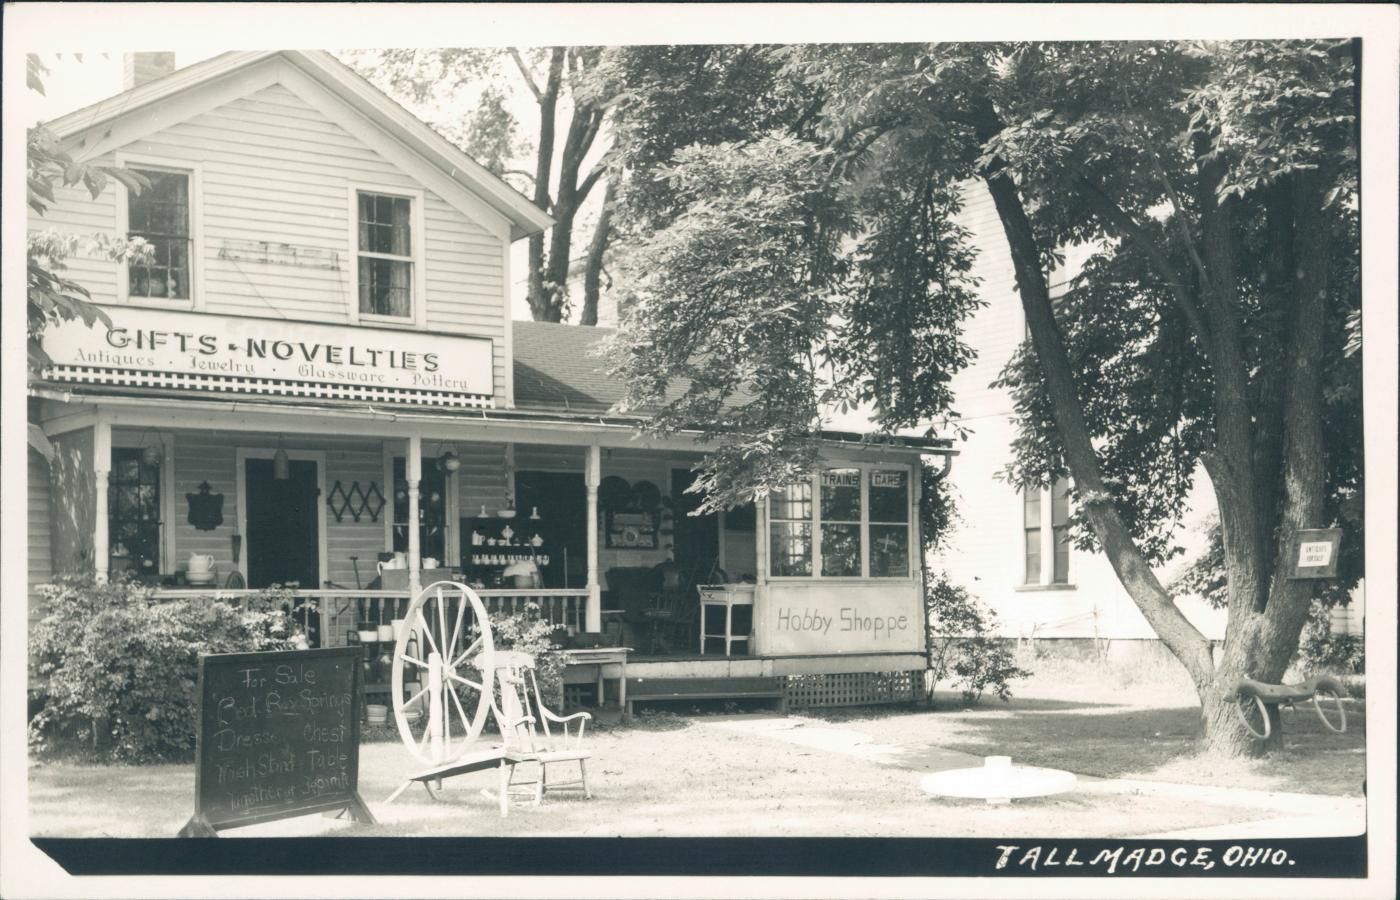 Some Other Stores and Businesses from Tallmadge's Past ~